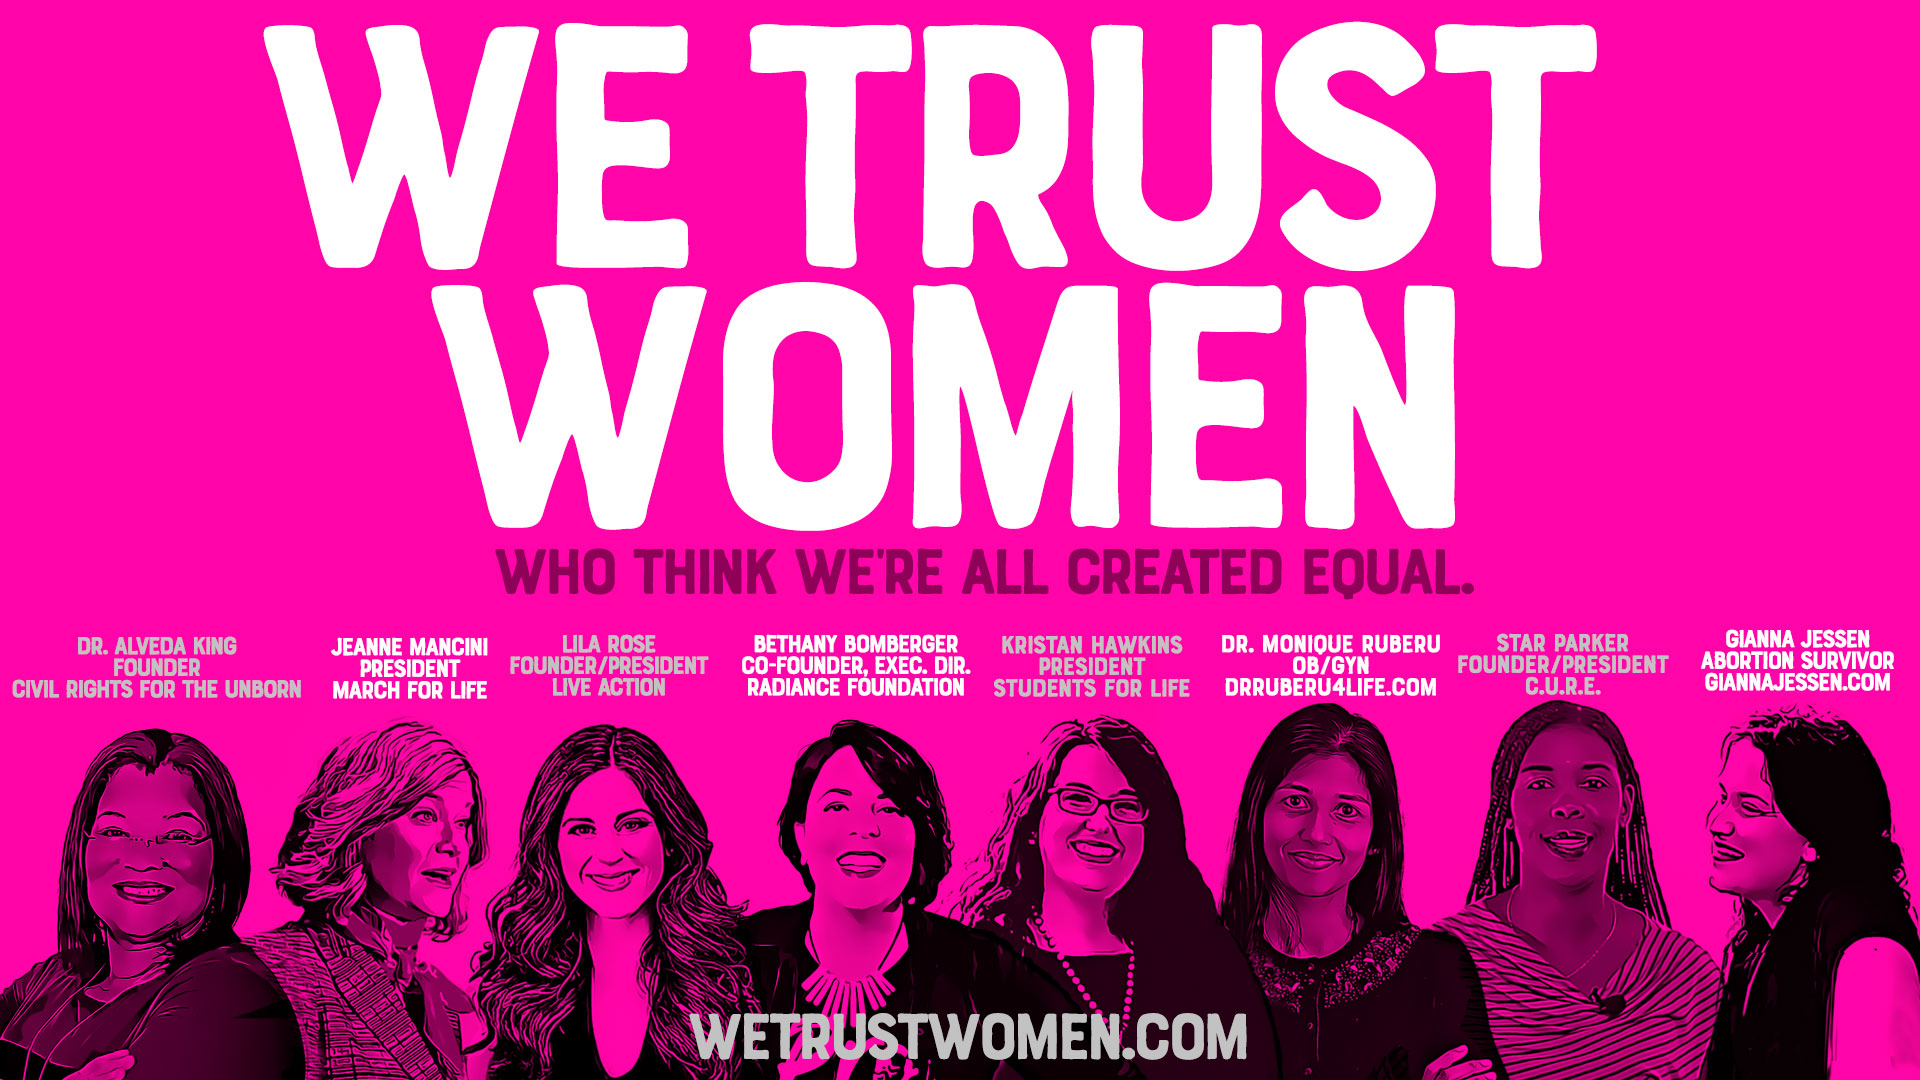 "WE TRUST WOMEN" by The Radiance Foundation